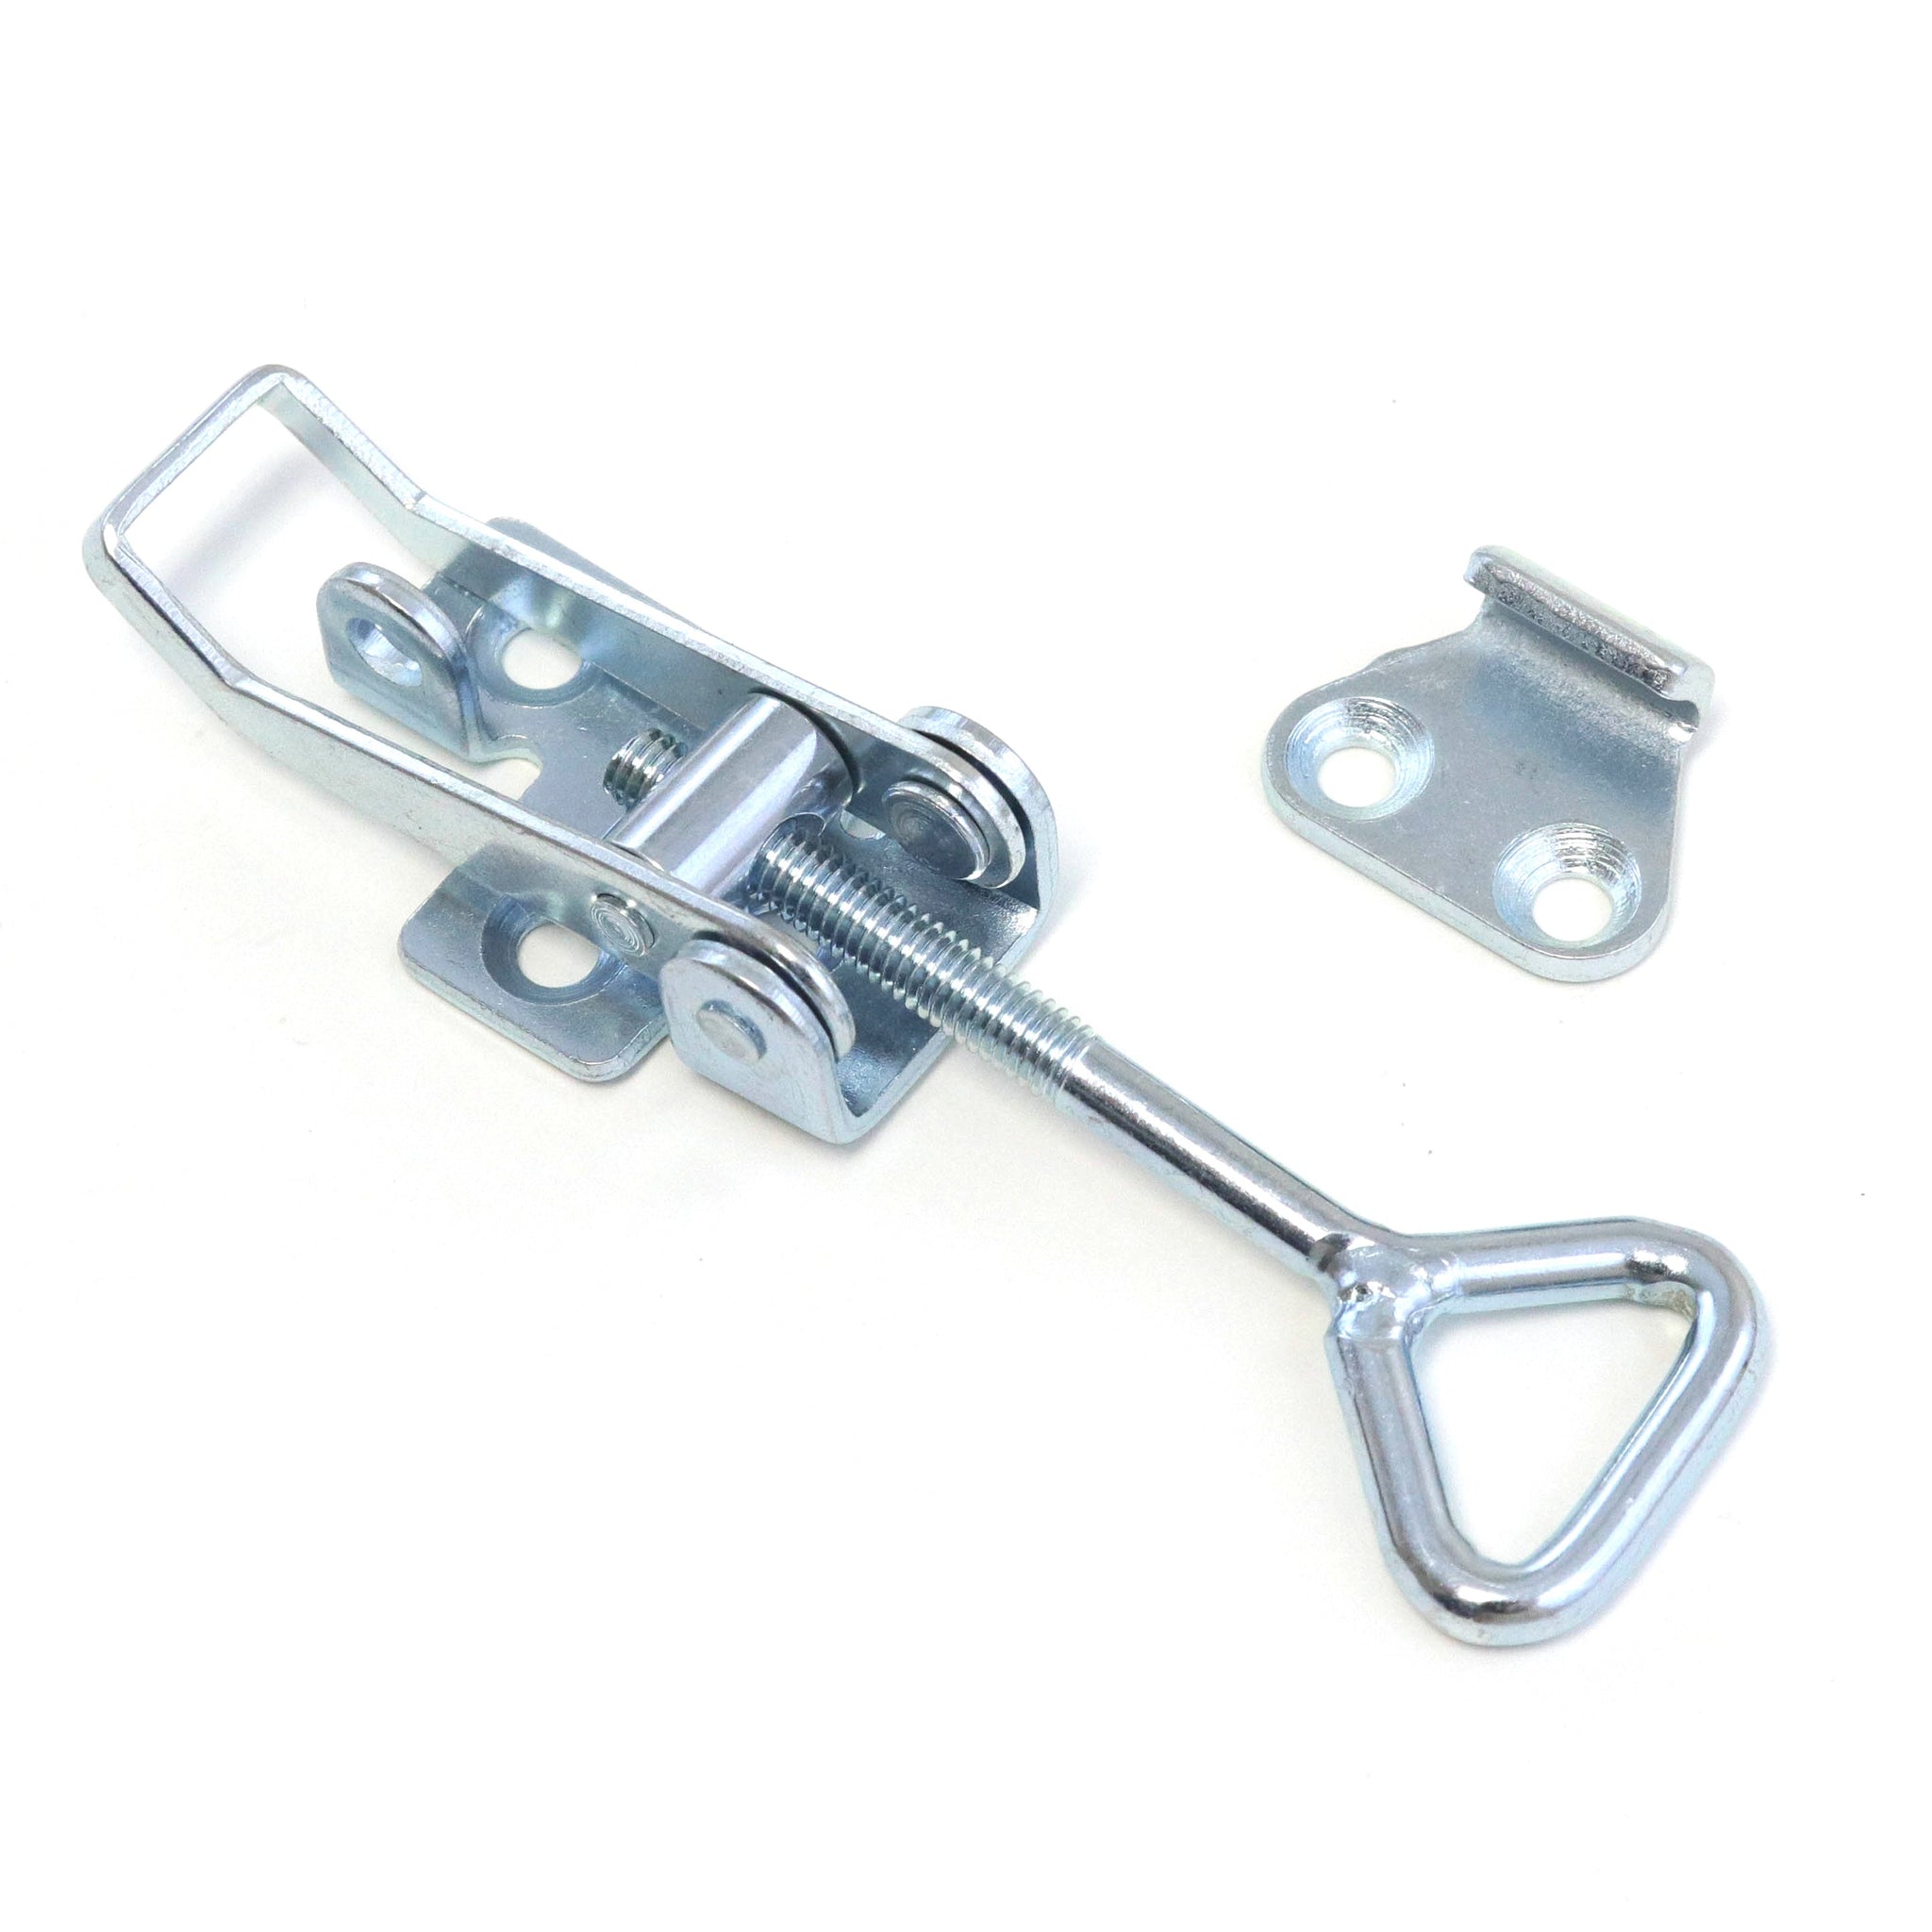 Red Hound Auto Pull Latch Toggle Clamp Adjustable Coated Steel for Cabinets Doors Storage Boxes and More 2-1/2" 66 mm